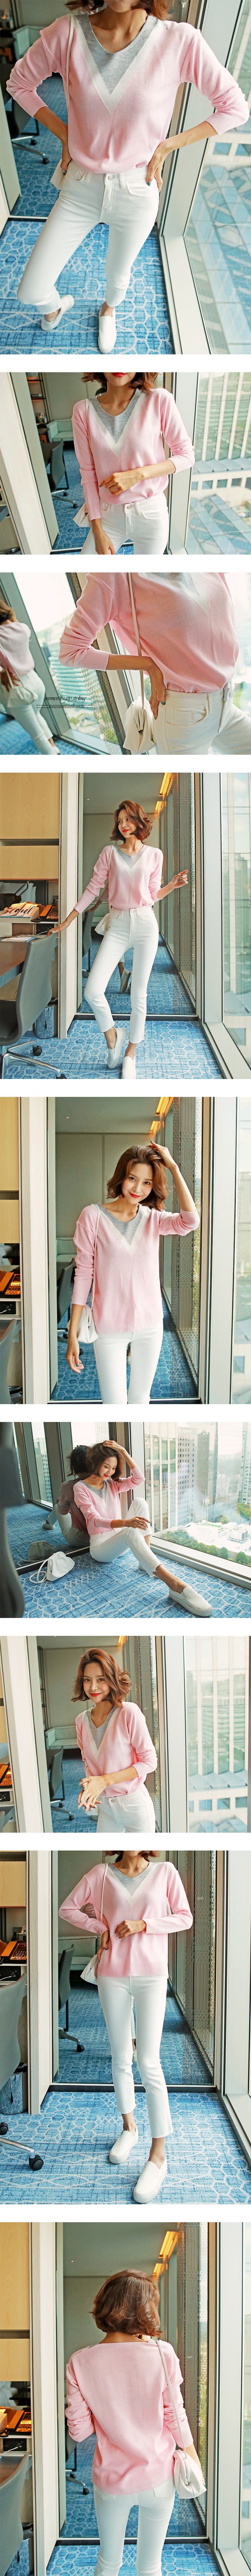 WINGS V-Neck Colorblock Sweater #Pink One Size(S-M)